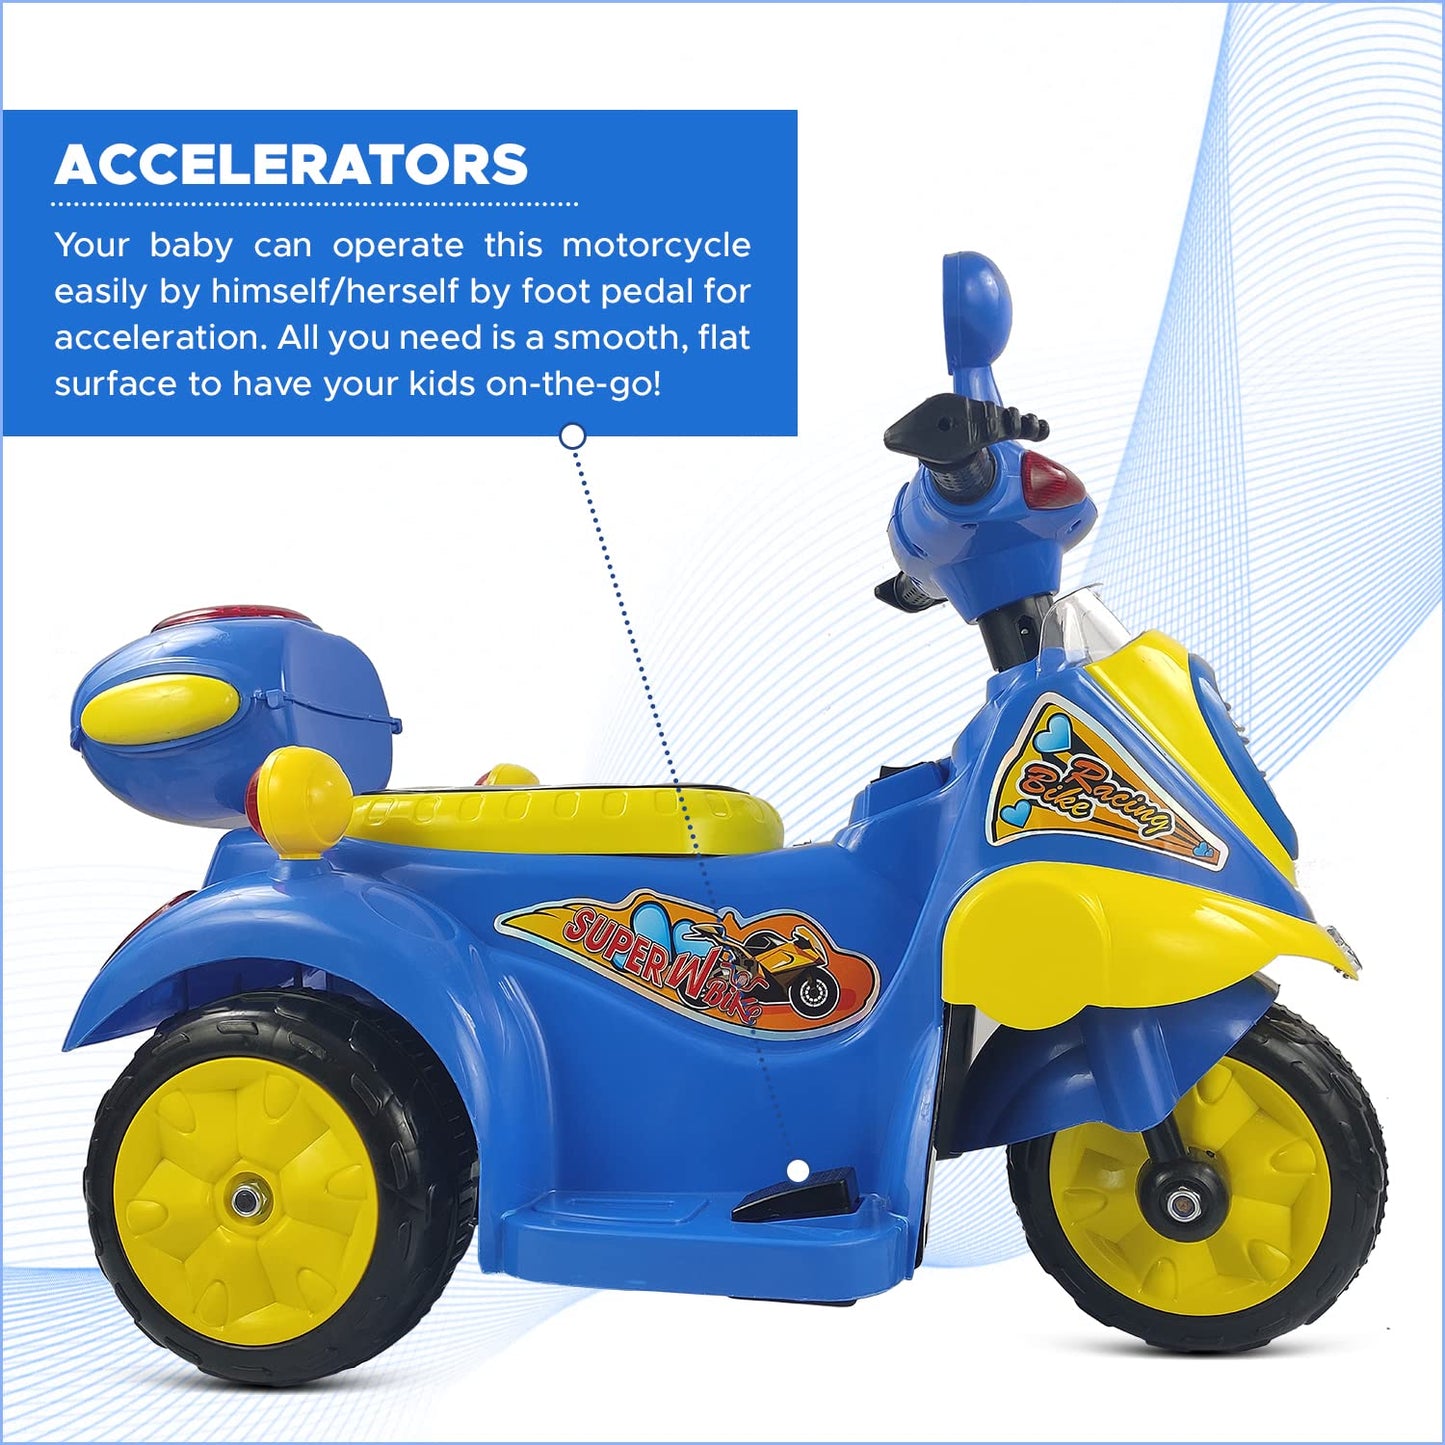 MM TOYS Electric Scooter Bike Ride-On - Feature-Packed with Lights and Music, Ideal for 2 to 5-Year-Old Kids, TM 333 Model, Vibrant Multicolor, Powered by 6V Rechargeable Batteries